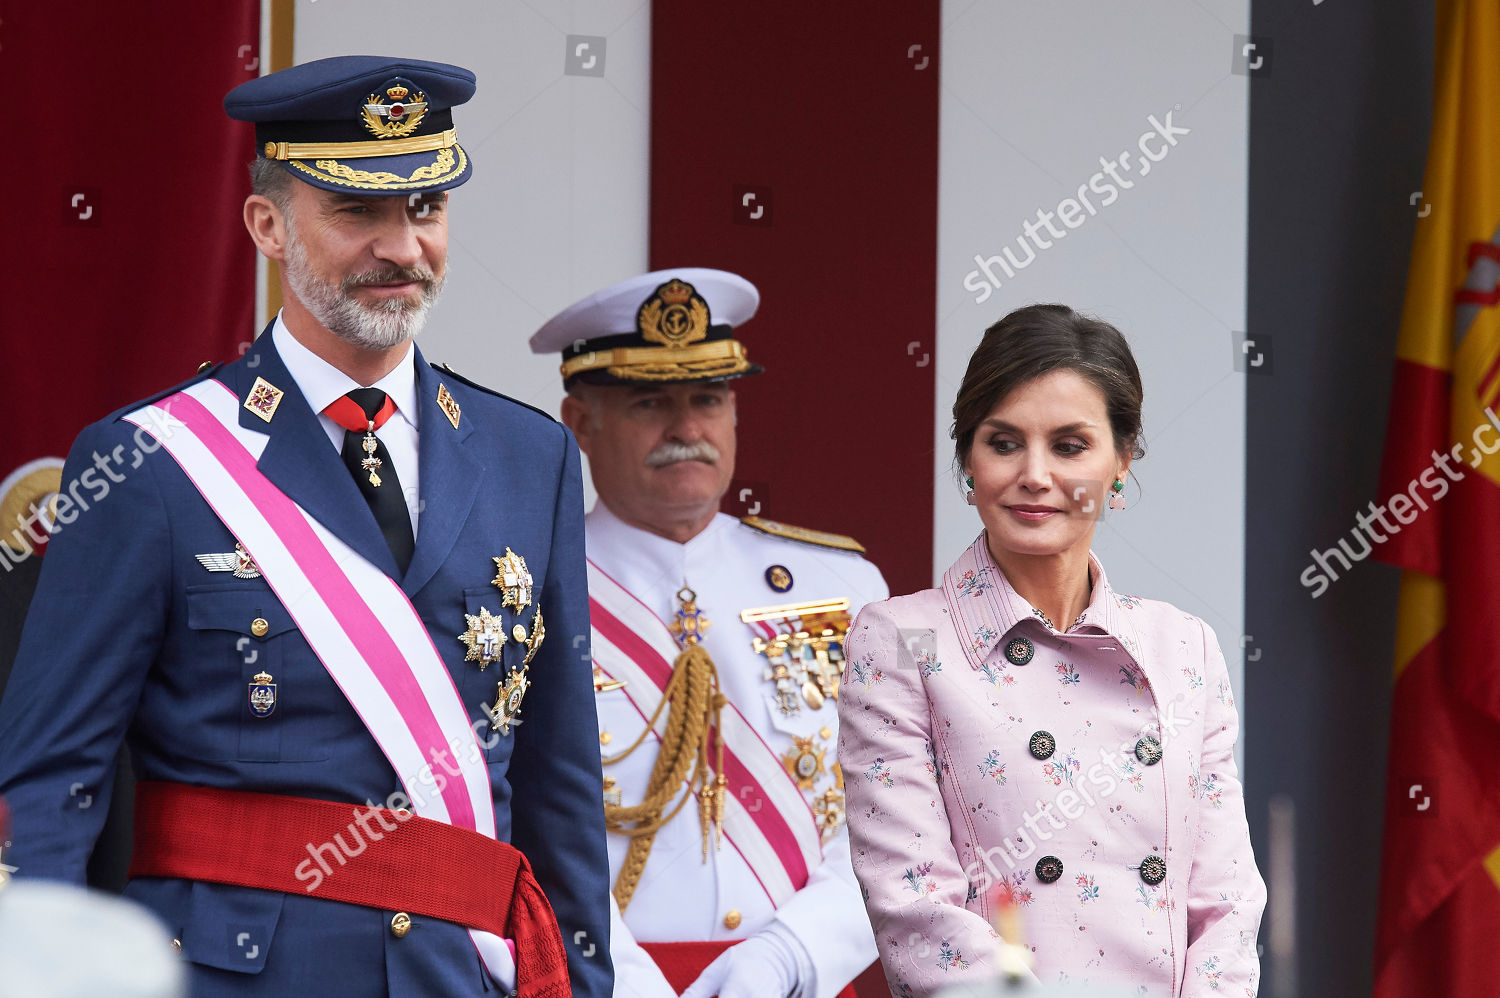 spanish-royals-attend-armed-forces-day-logrono-spain-9694136h-1500.jpg